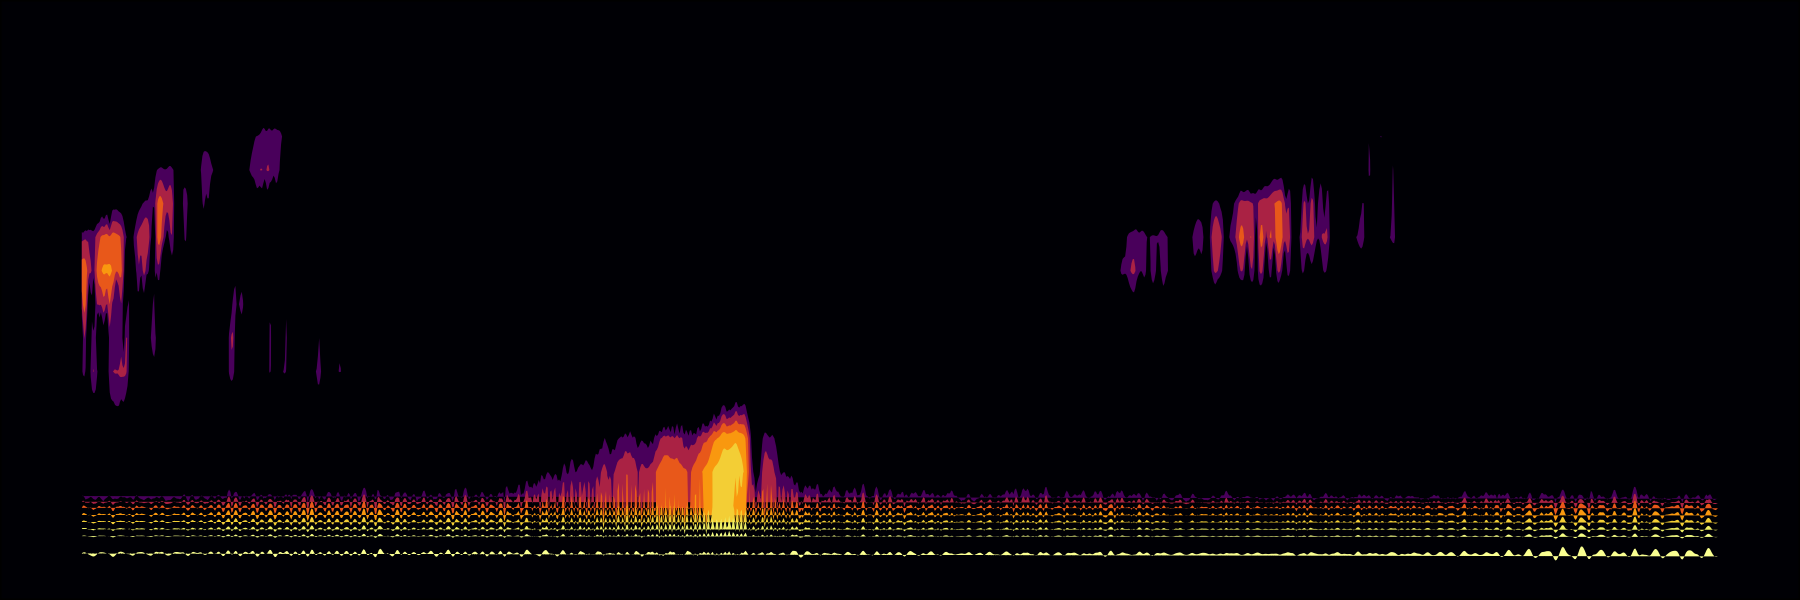 Humpback whale song spectrogram